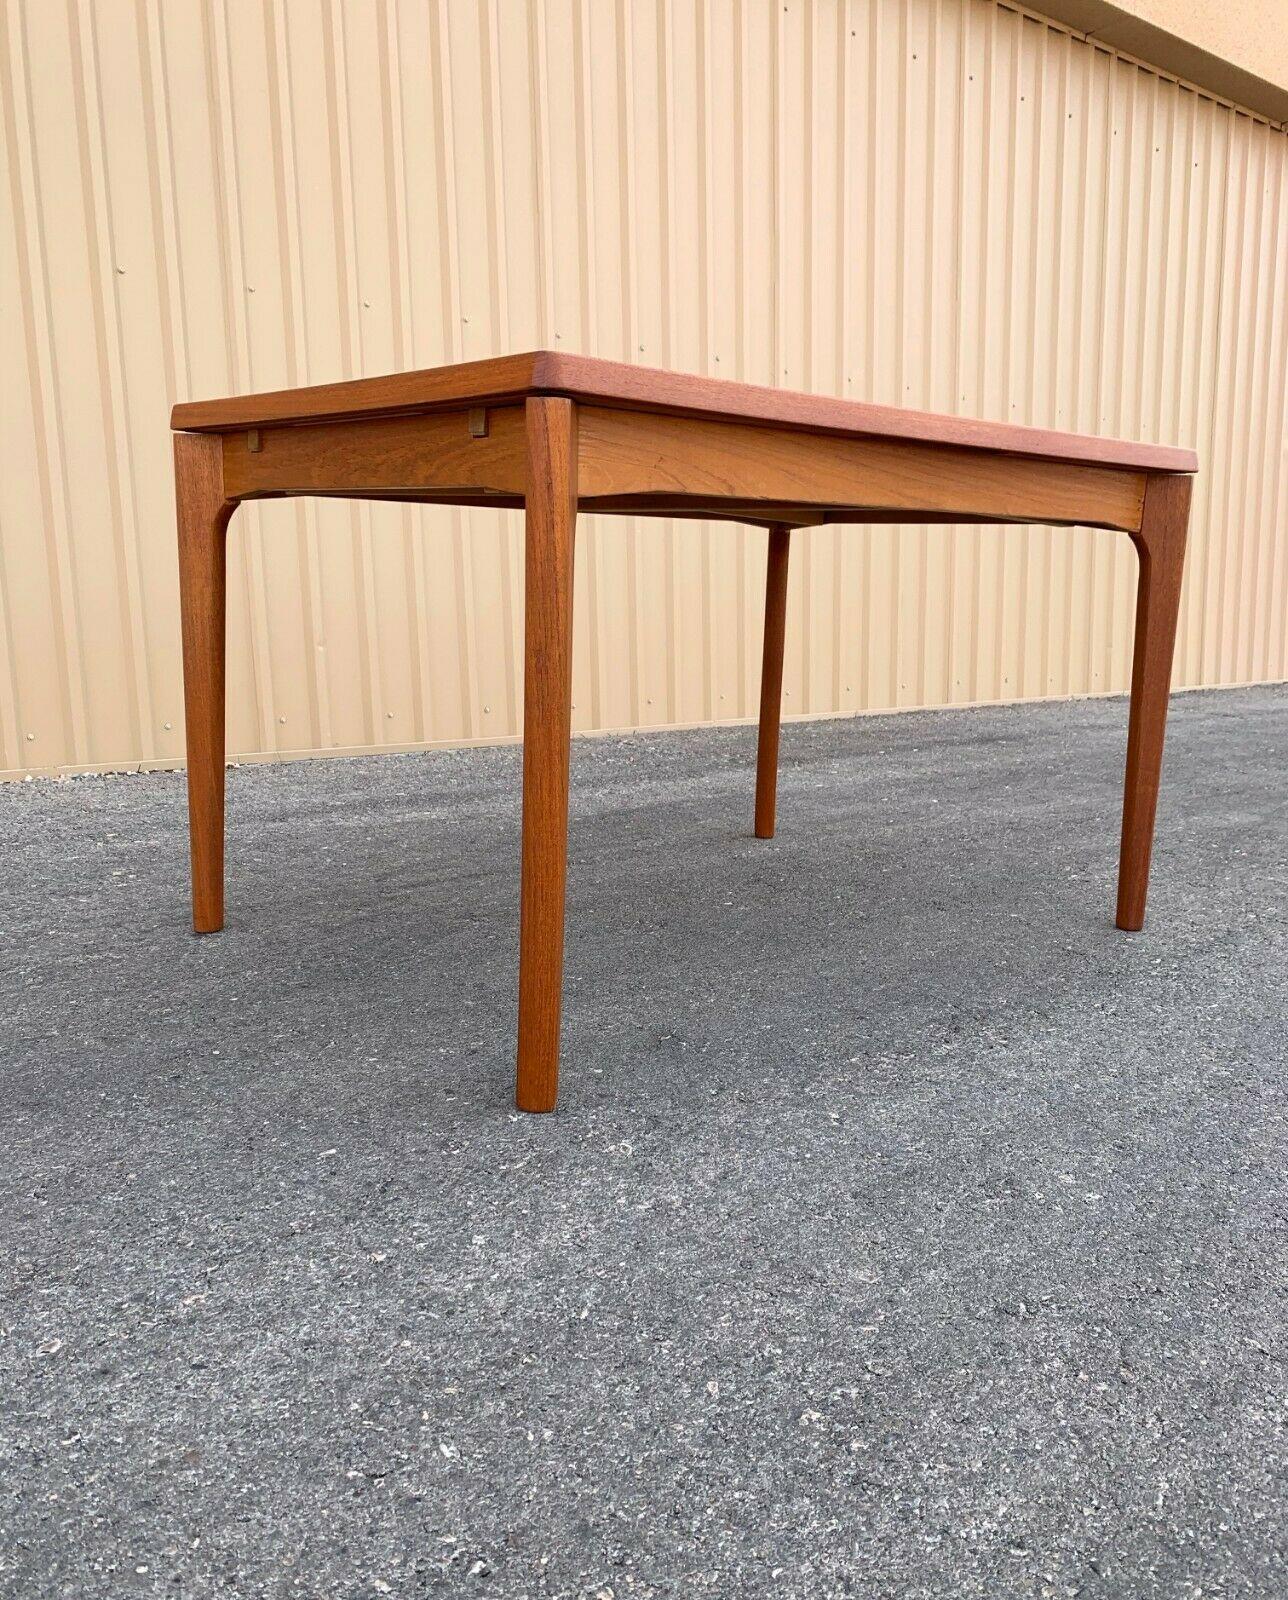 Teak dinning table by Henning Kjærnulf for Vejle Stole Møbelfabrik 
This Mid-Century Modern Danish design dining table was designed by Henning Kjaernulf for Vejle Stole Møbelfabrik during the 1960s. The table features two extension pieces,